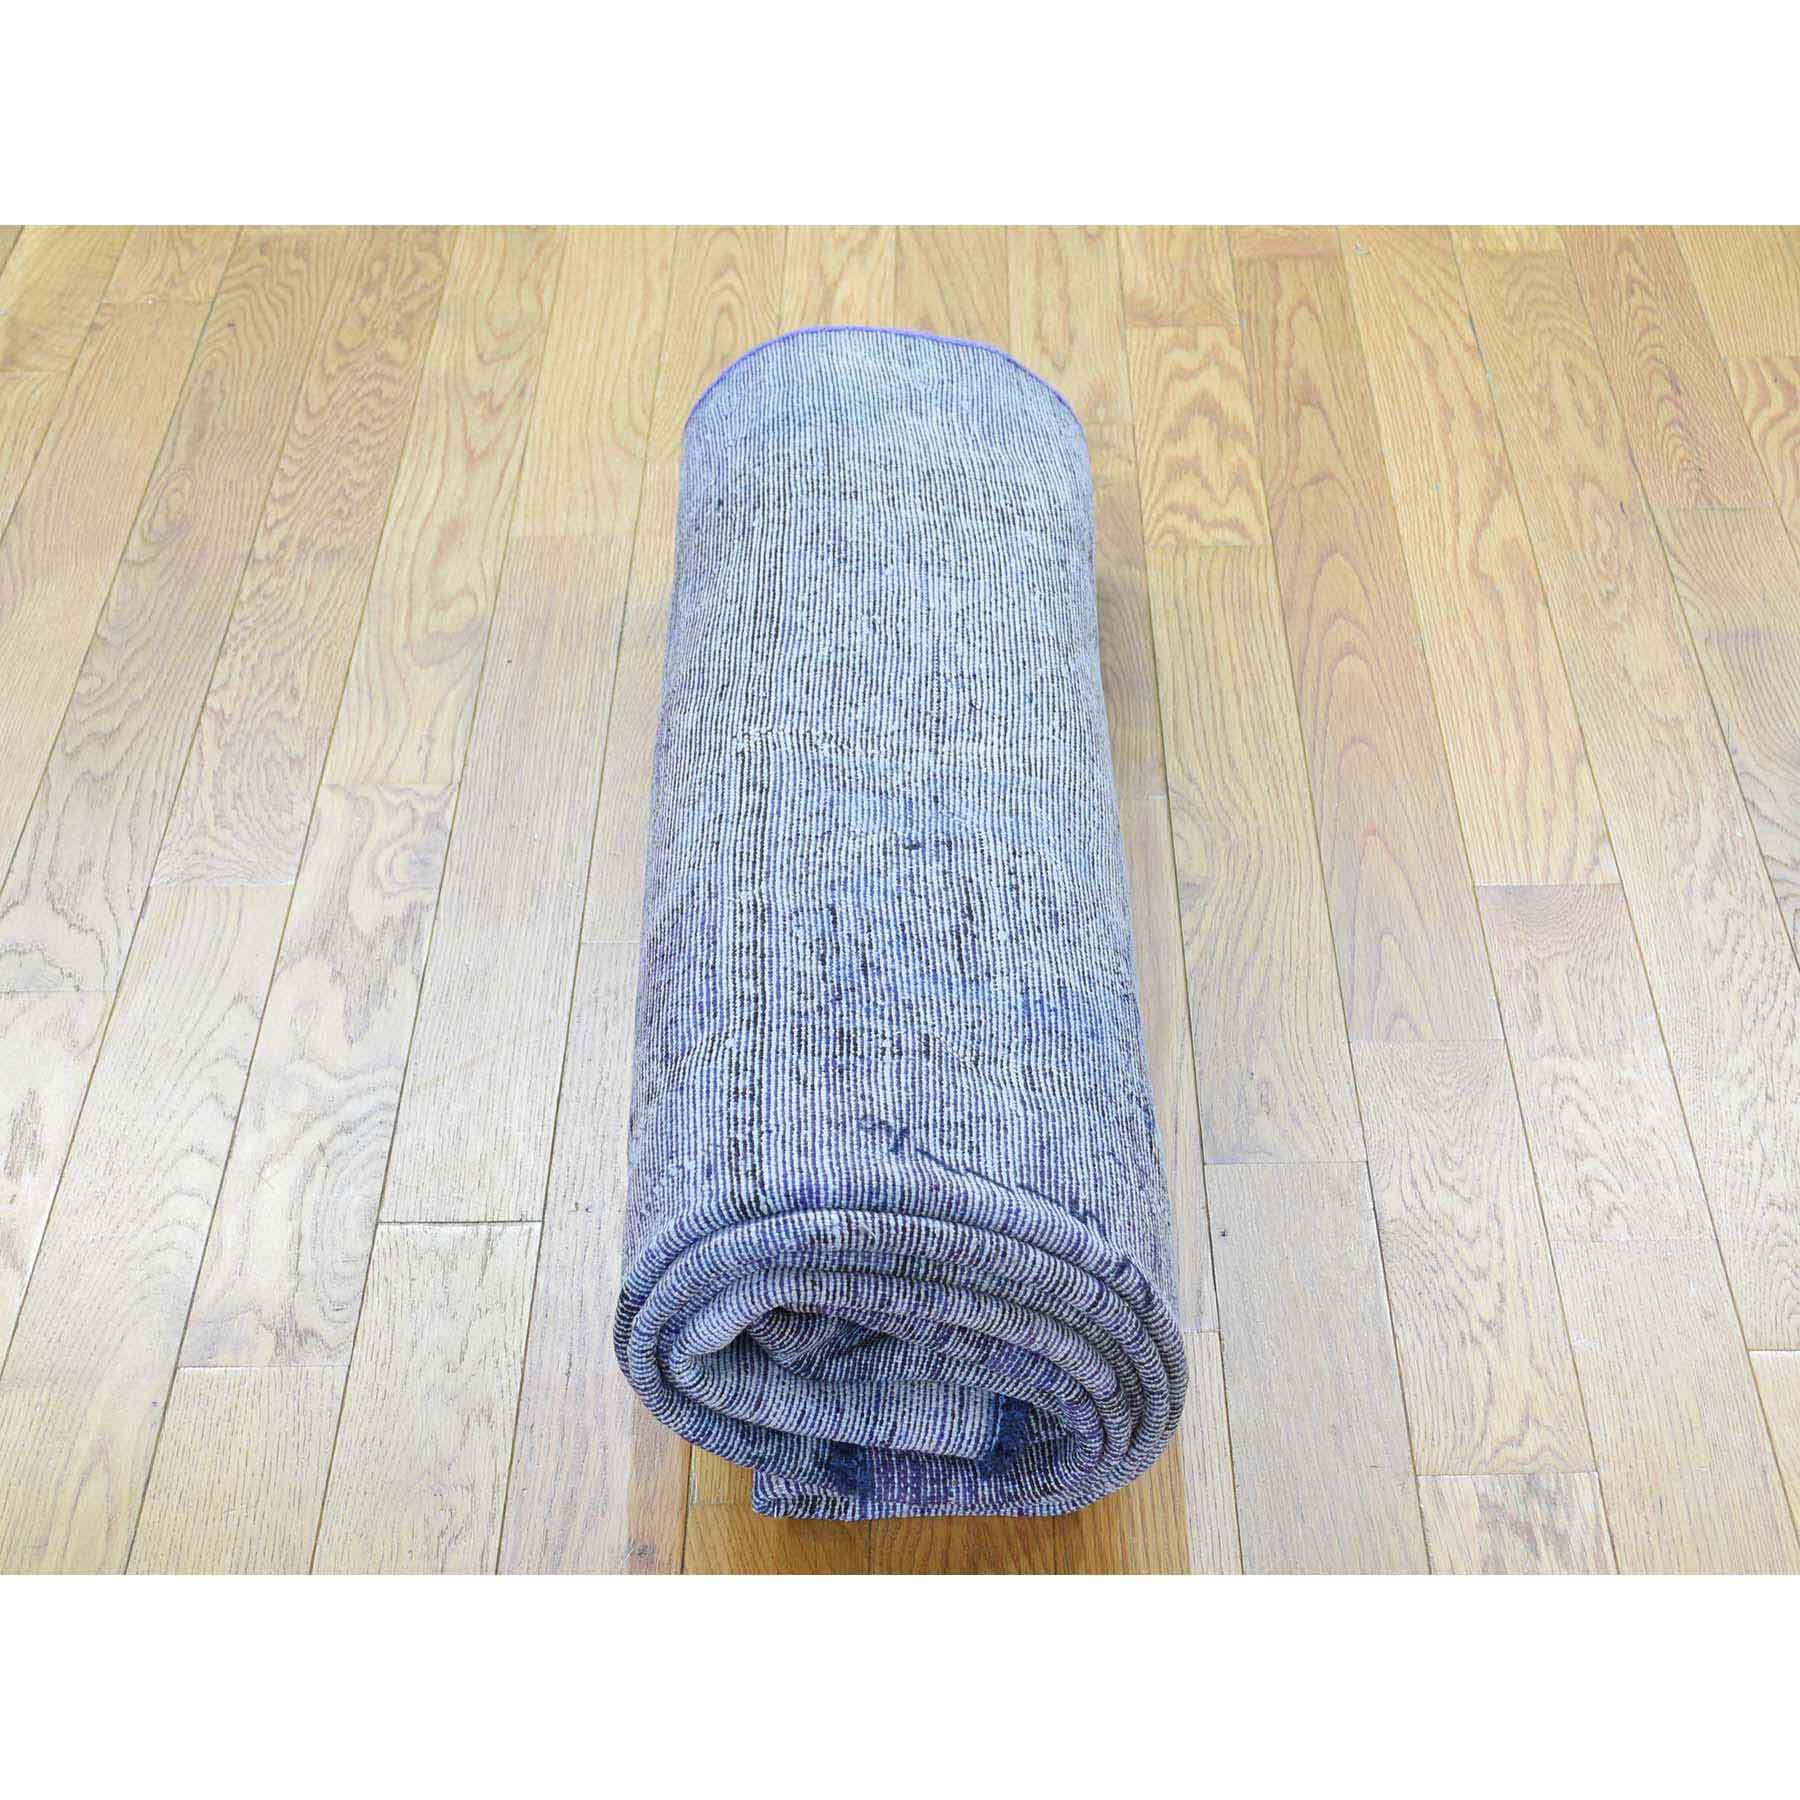 Overdyed-Vintage-Hand-Knotted-Rug-164020